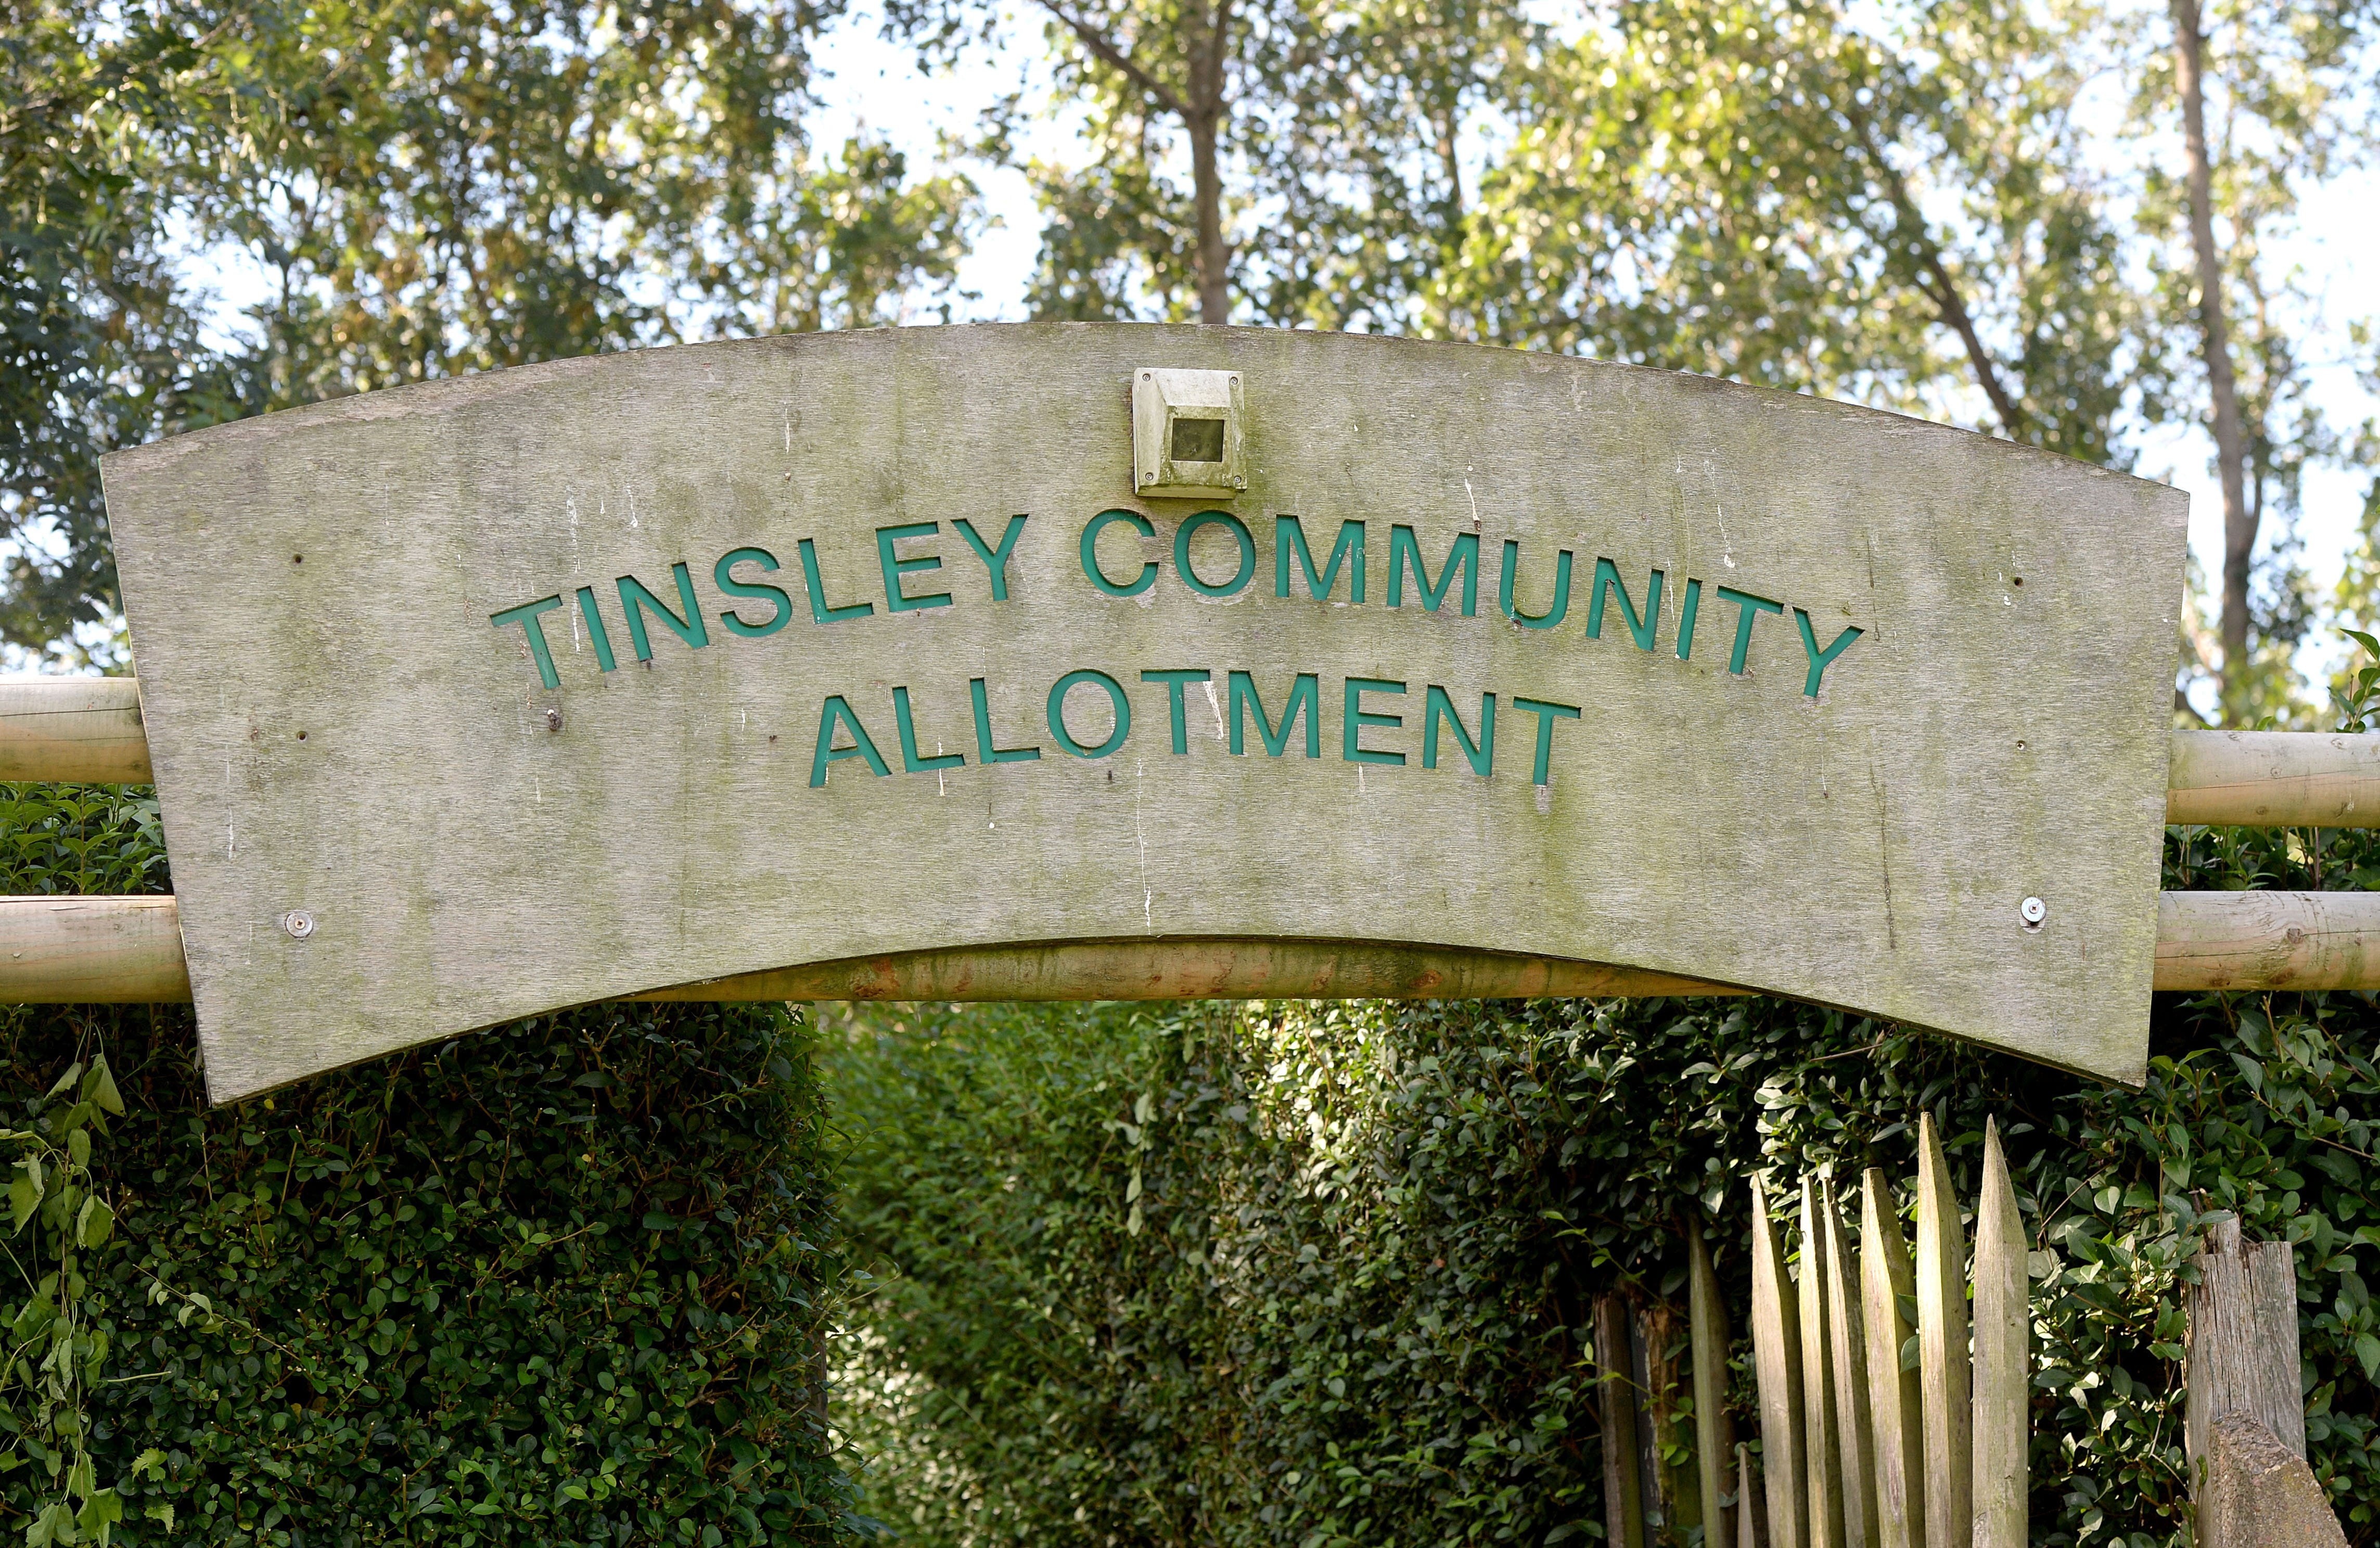 The Tinsley Community Allotment in Sheffield, South Yorkshire, which has won a 'Cultivation Street' award - a competition run by celebrity gardener, David Domoney.